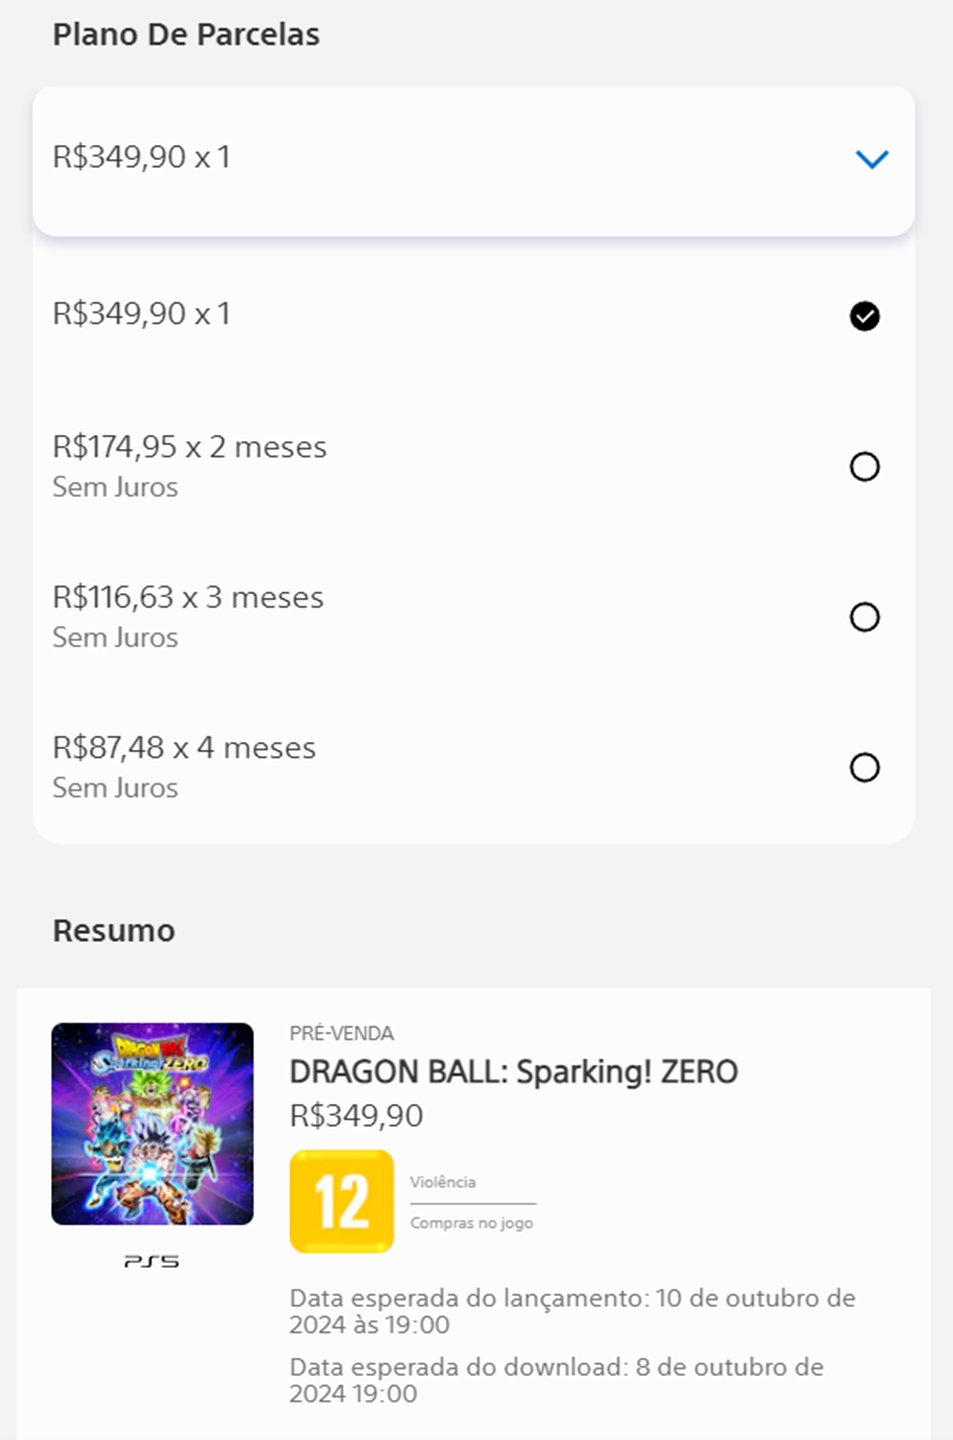 It is possible to pay for your PS Store purchases in up to four interest-free installments on your credit card.  The basic version of Dragon Ball Sparking Zero, for example, can be paid in up to four R$87.48.